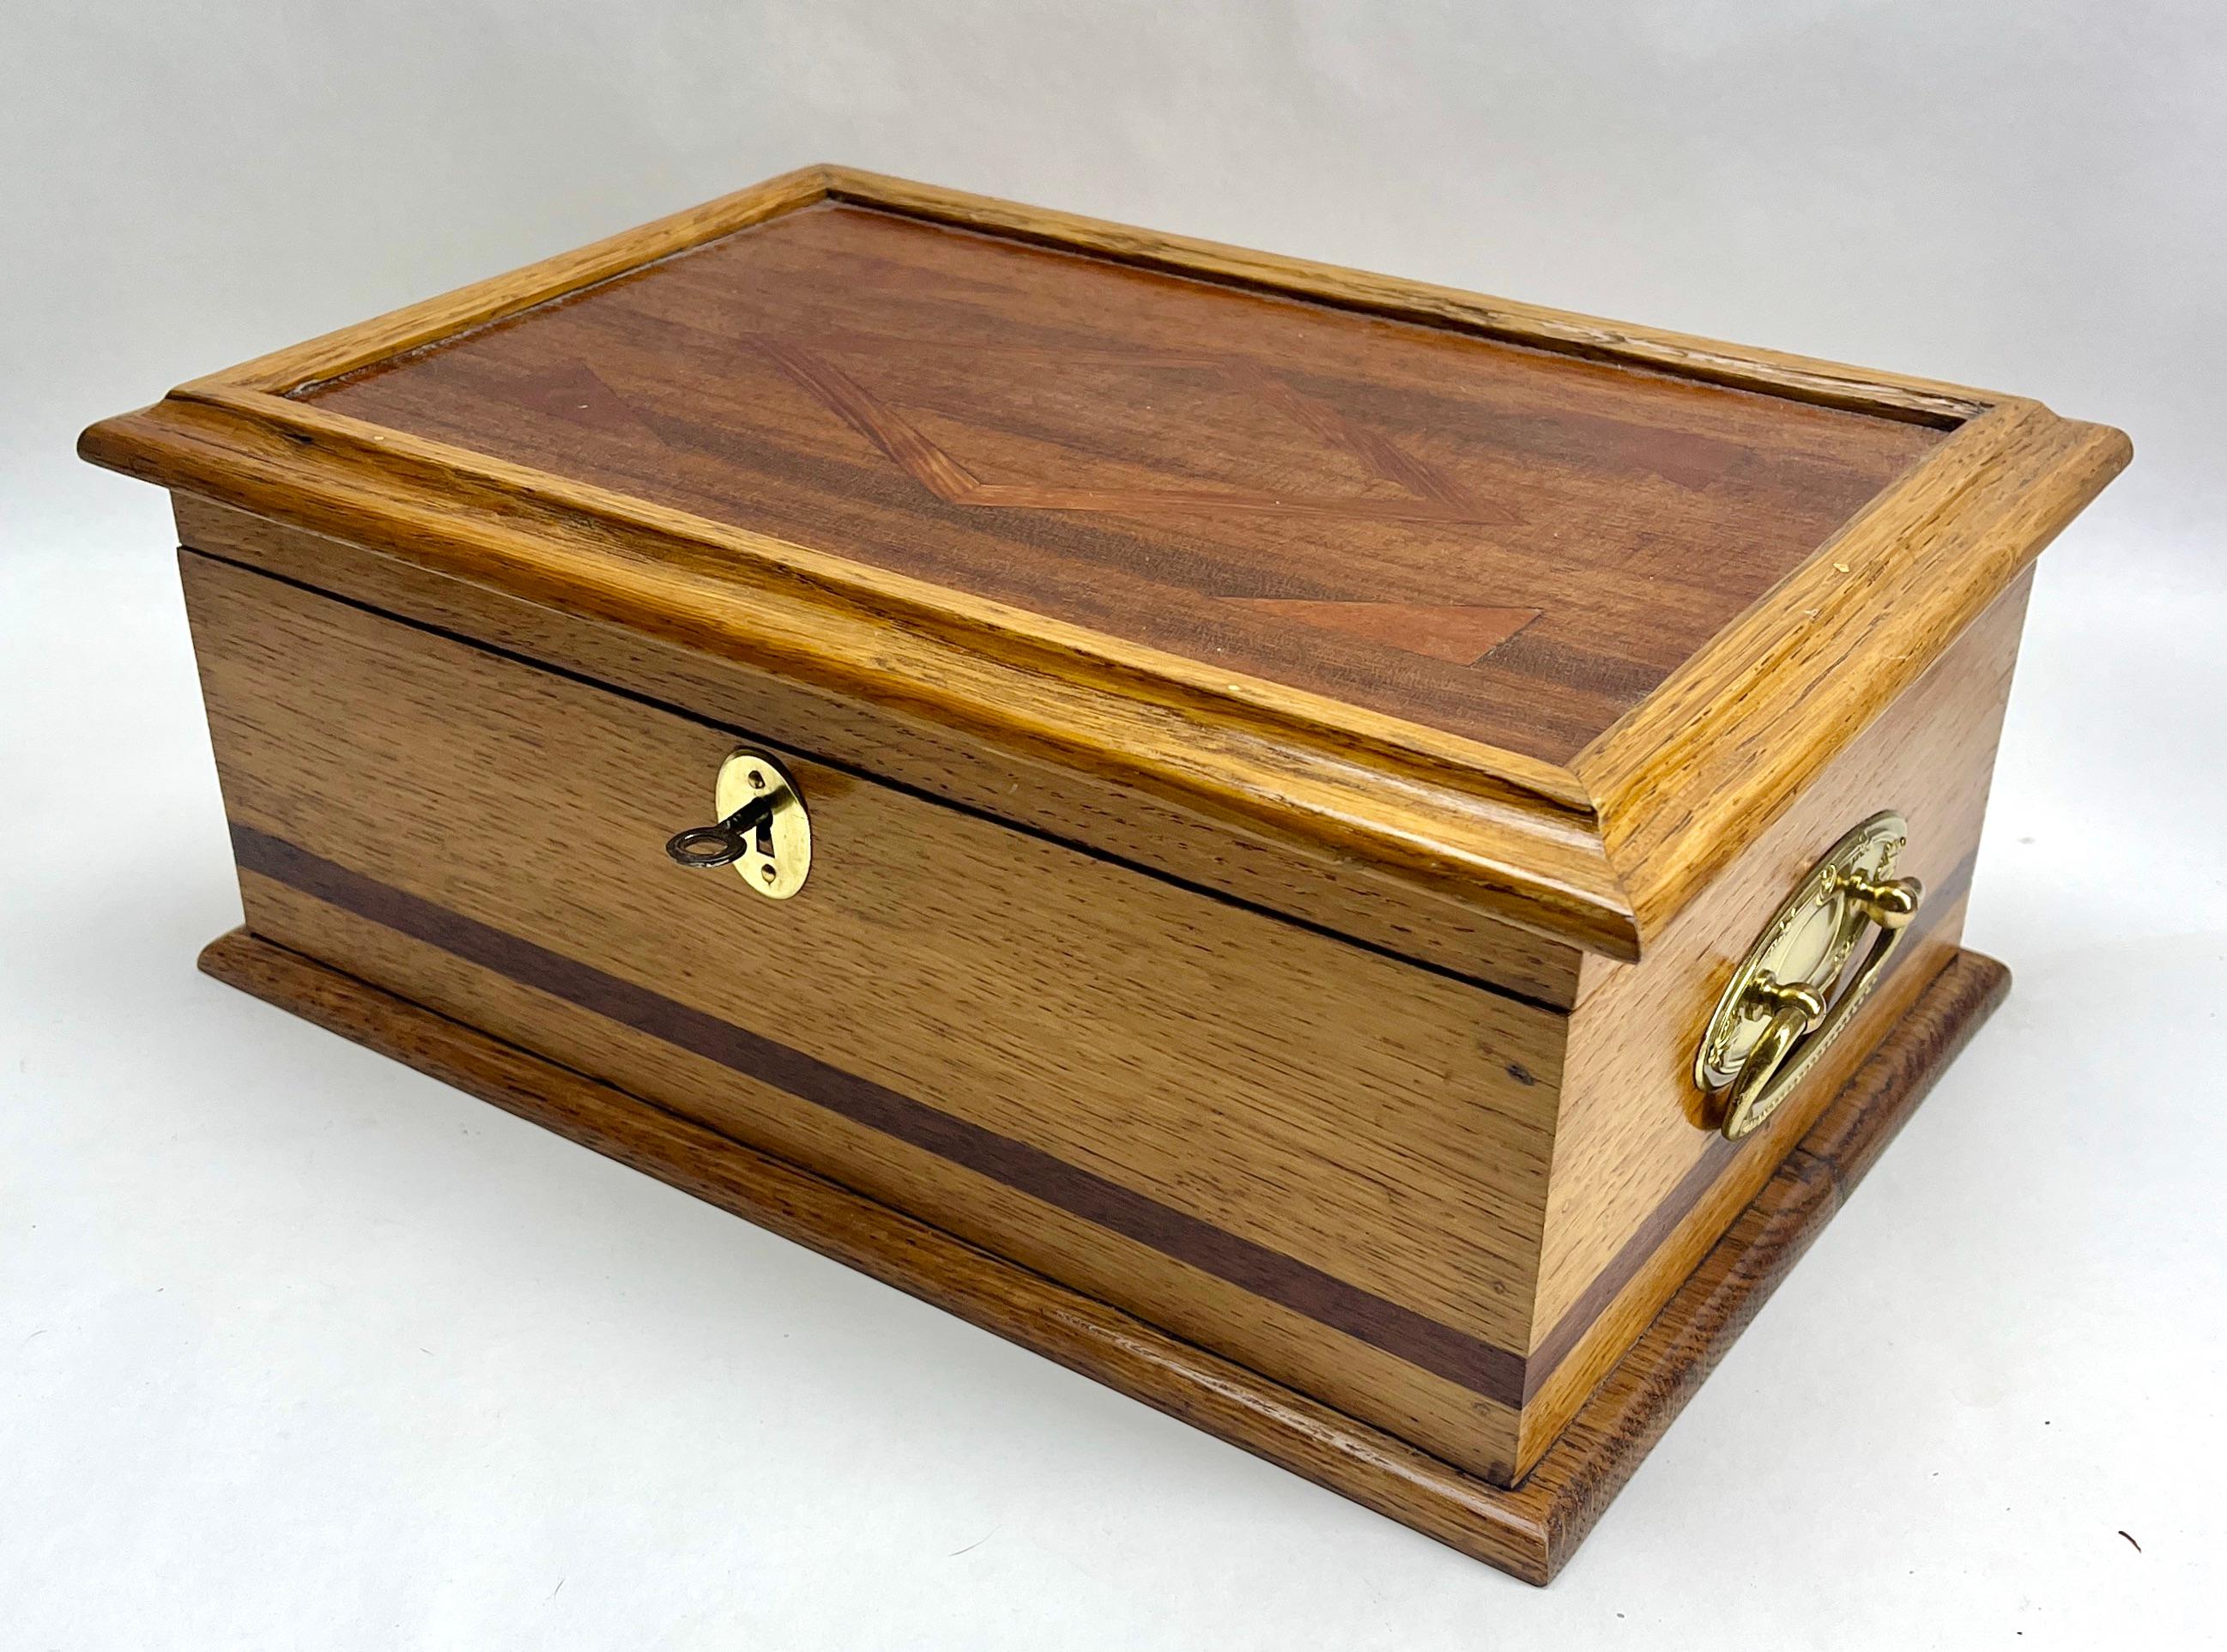 Solid oak Arts & Crafts box, Austria, circa 1910s
Originel key available

A solid oak box from the Arts & Crafts period,
Made in Austria.
A very special item with decorative Brass metalwork  
Definitely one of a kind.
Looks simply stunning.

Please